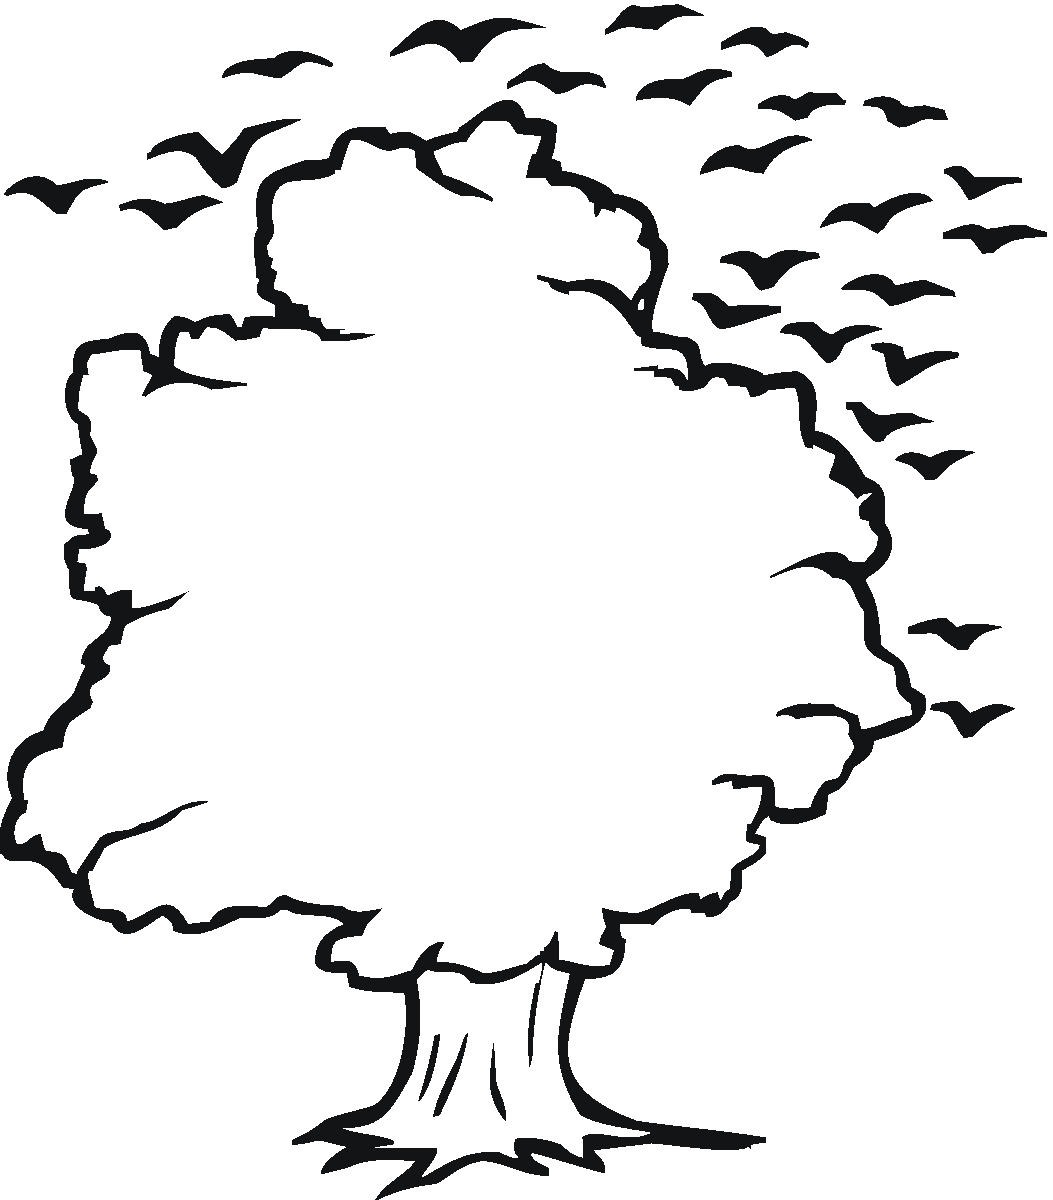 Tree outline coloring page - Coloring Pages & Pictures - IMAGIXS